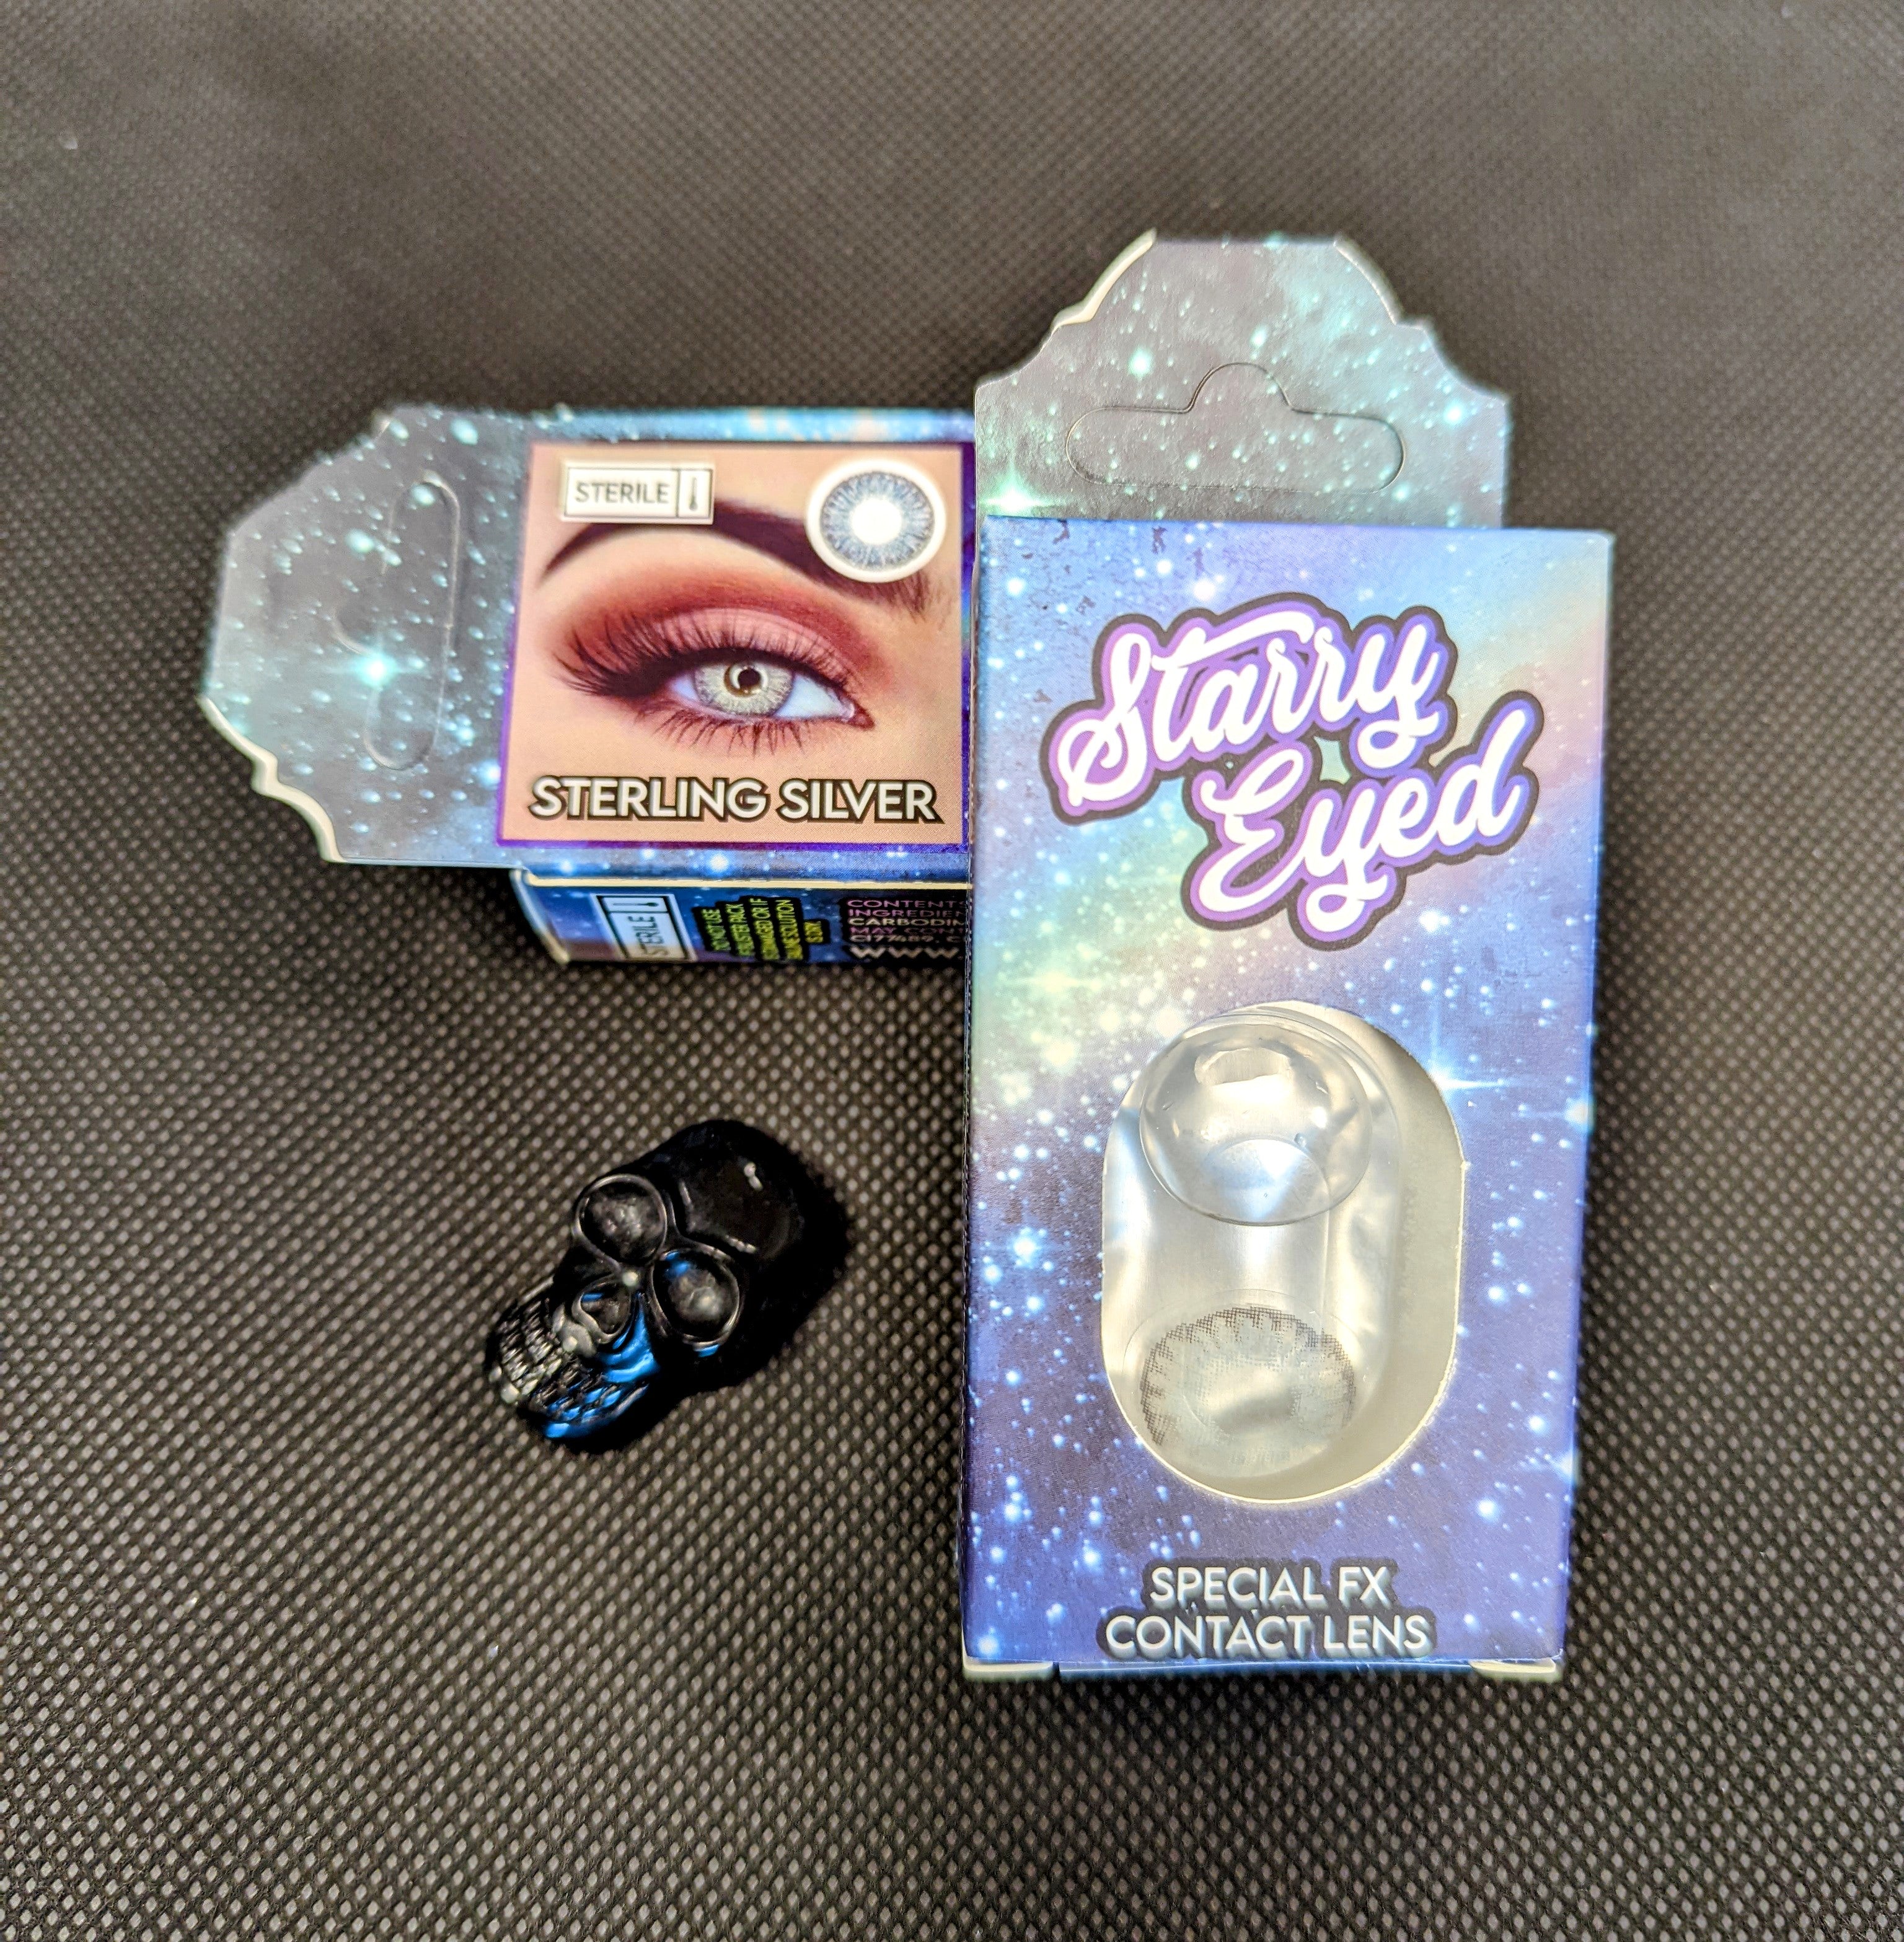 Starry Eyed Yearly Lenses - STERLING SILVER